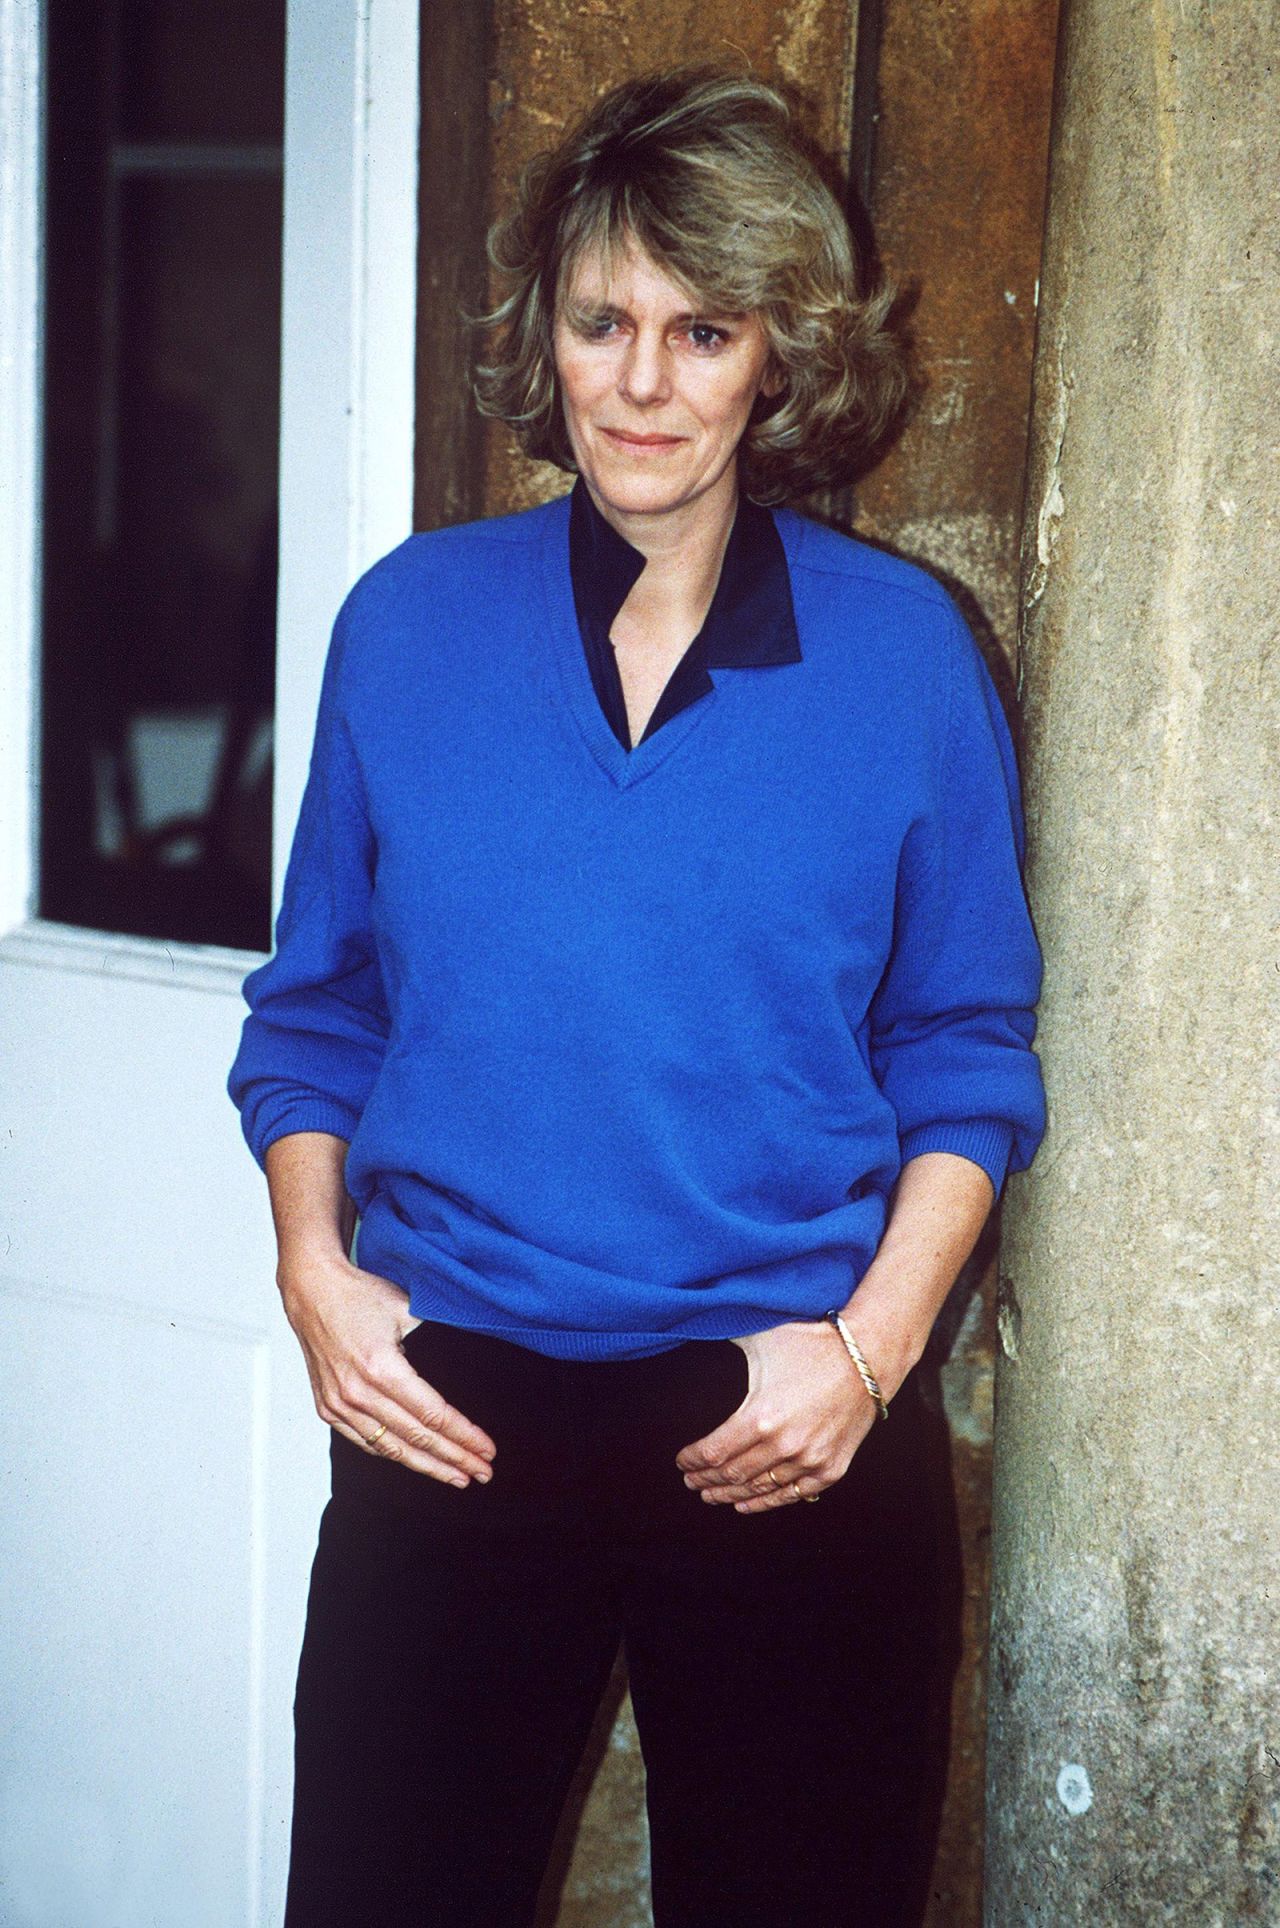 On the grounds of her country home in Wiltshire, south west England in 1992, the Queen consort looked cozy and comfortable in vibrant knit pullovers.